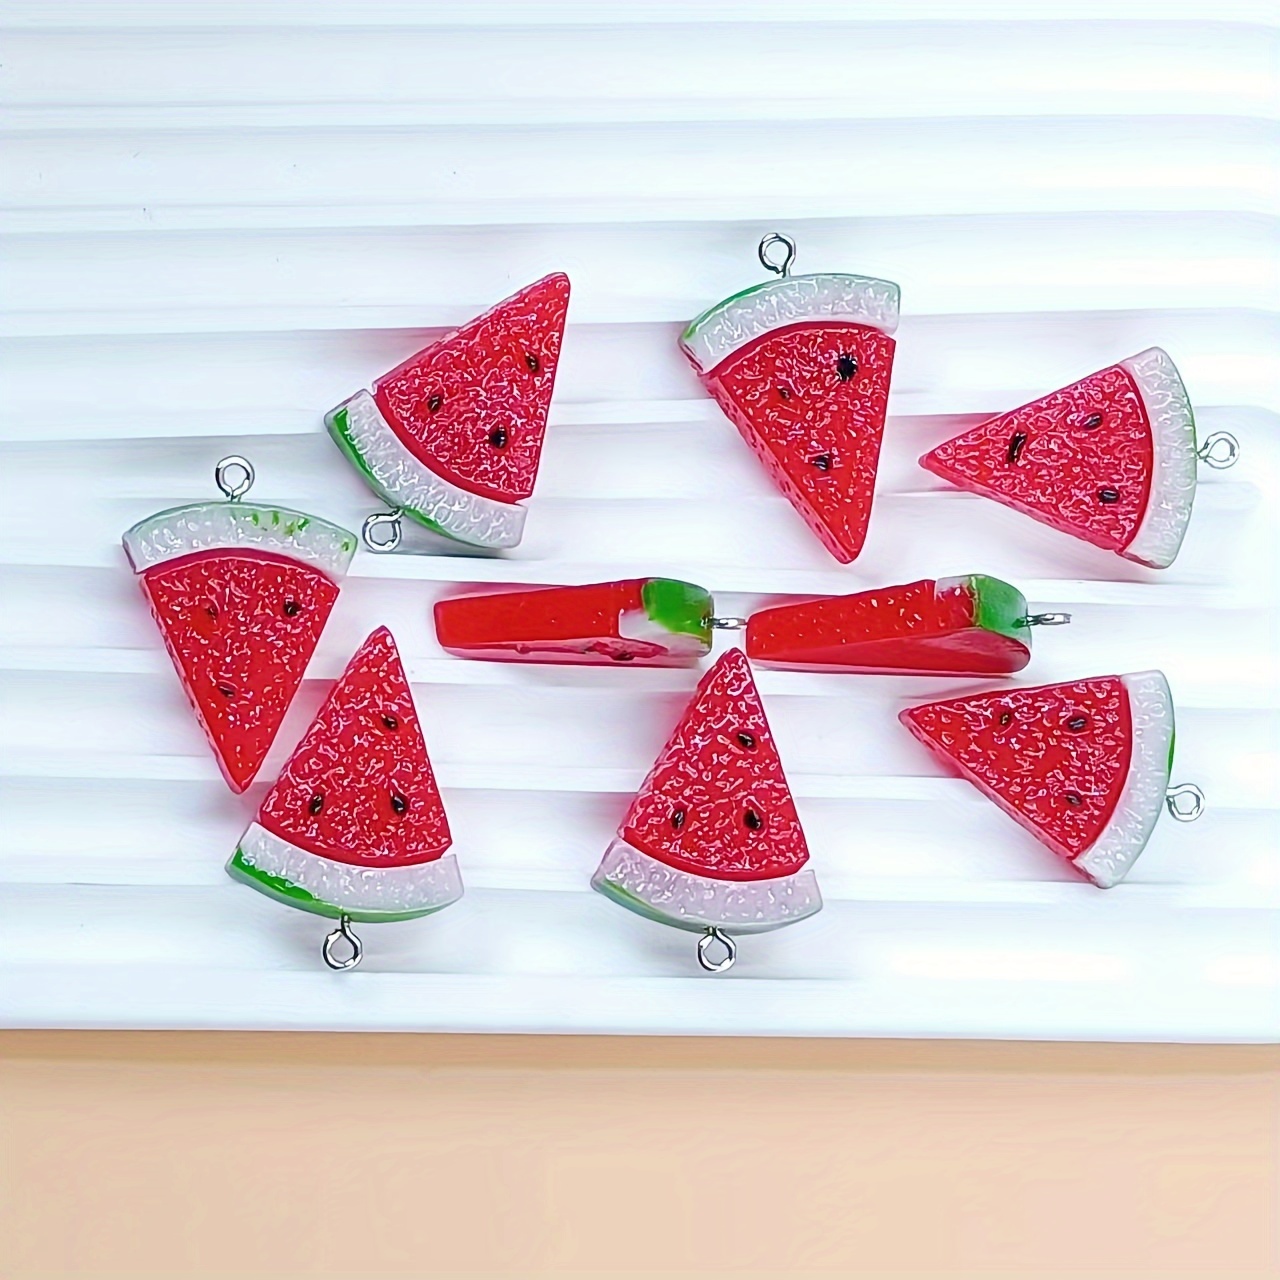 

10pcs Simulation Food Double-sided Watermelon Resin Charms For Jewelry Accessories, Diy Necklace Earrings Keychain Pendant Material